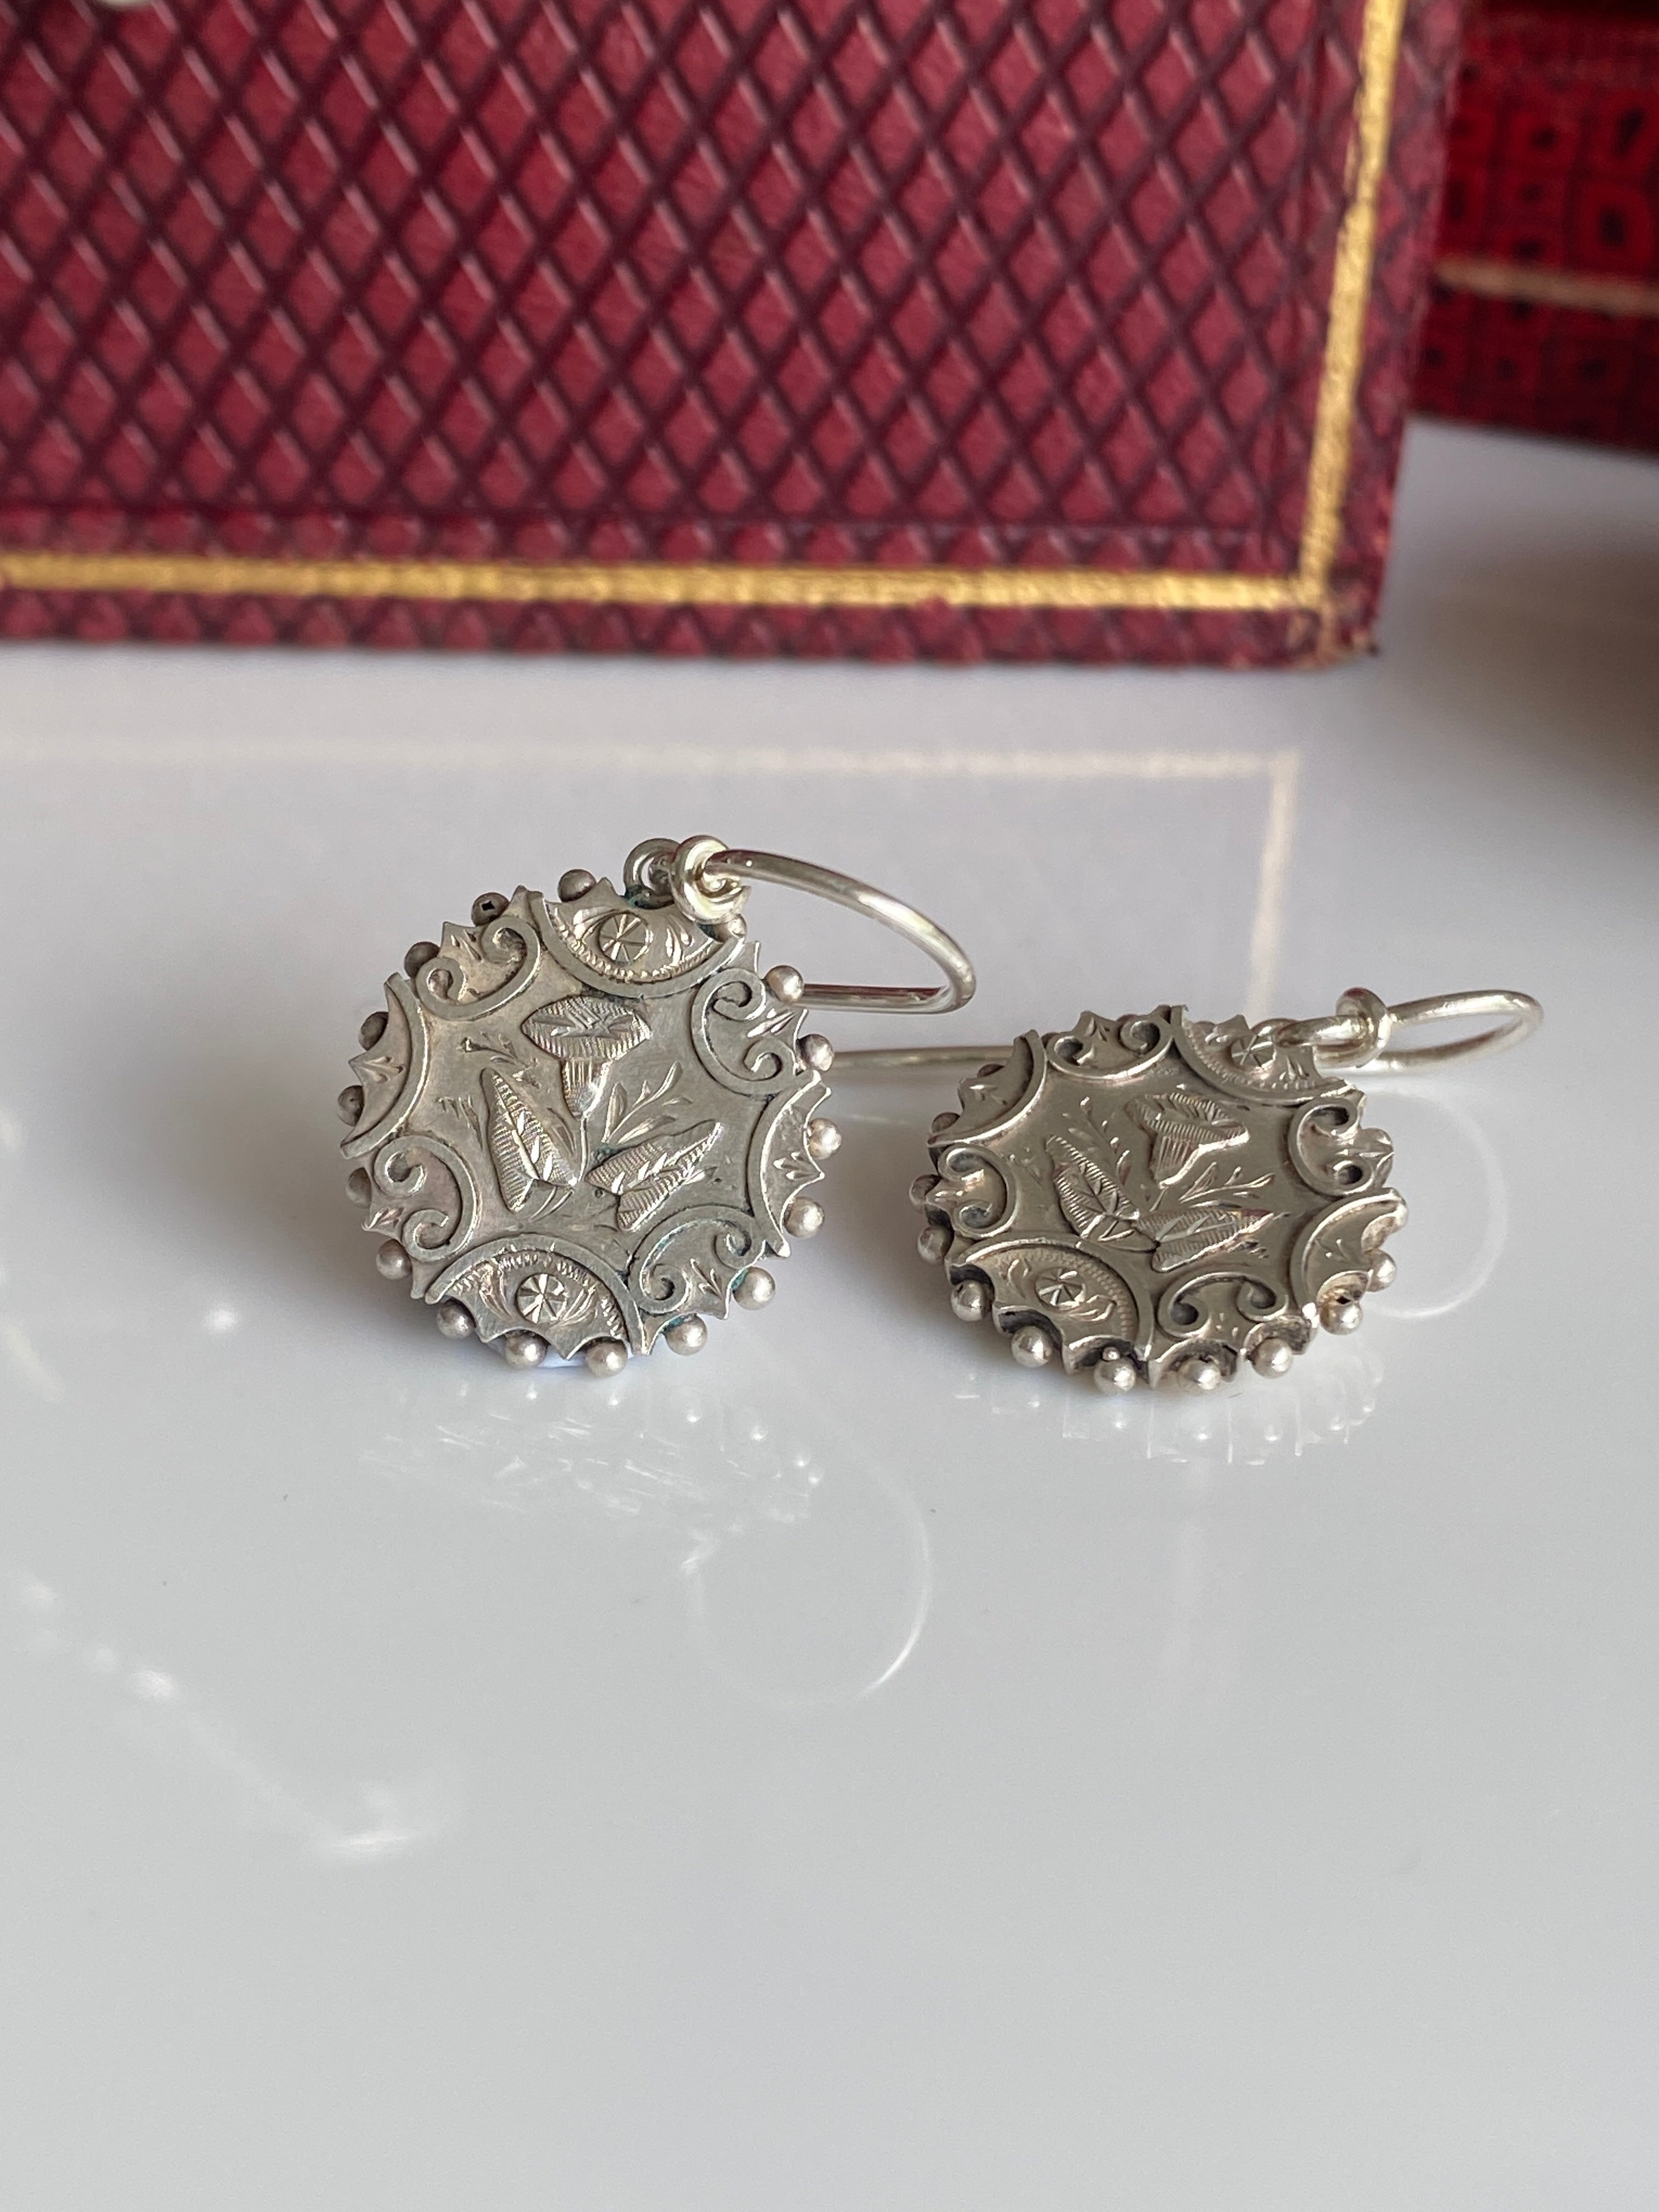 Antique Victorian Silver Earrings, 1880s